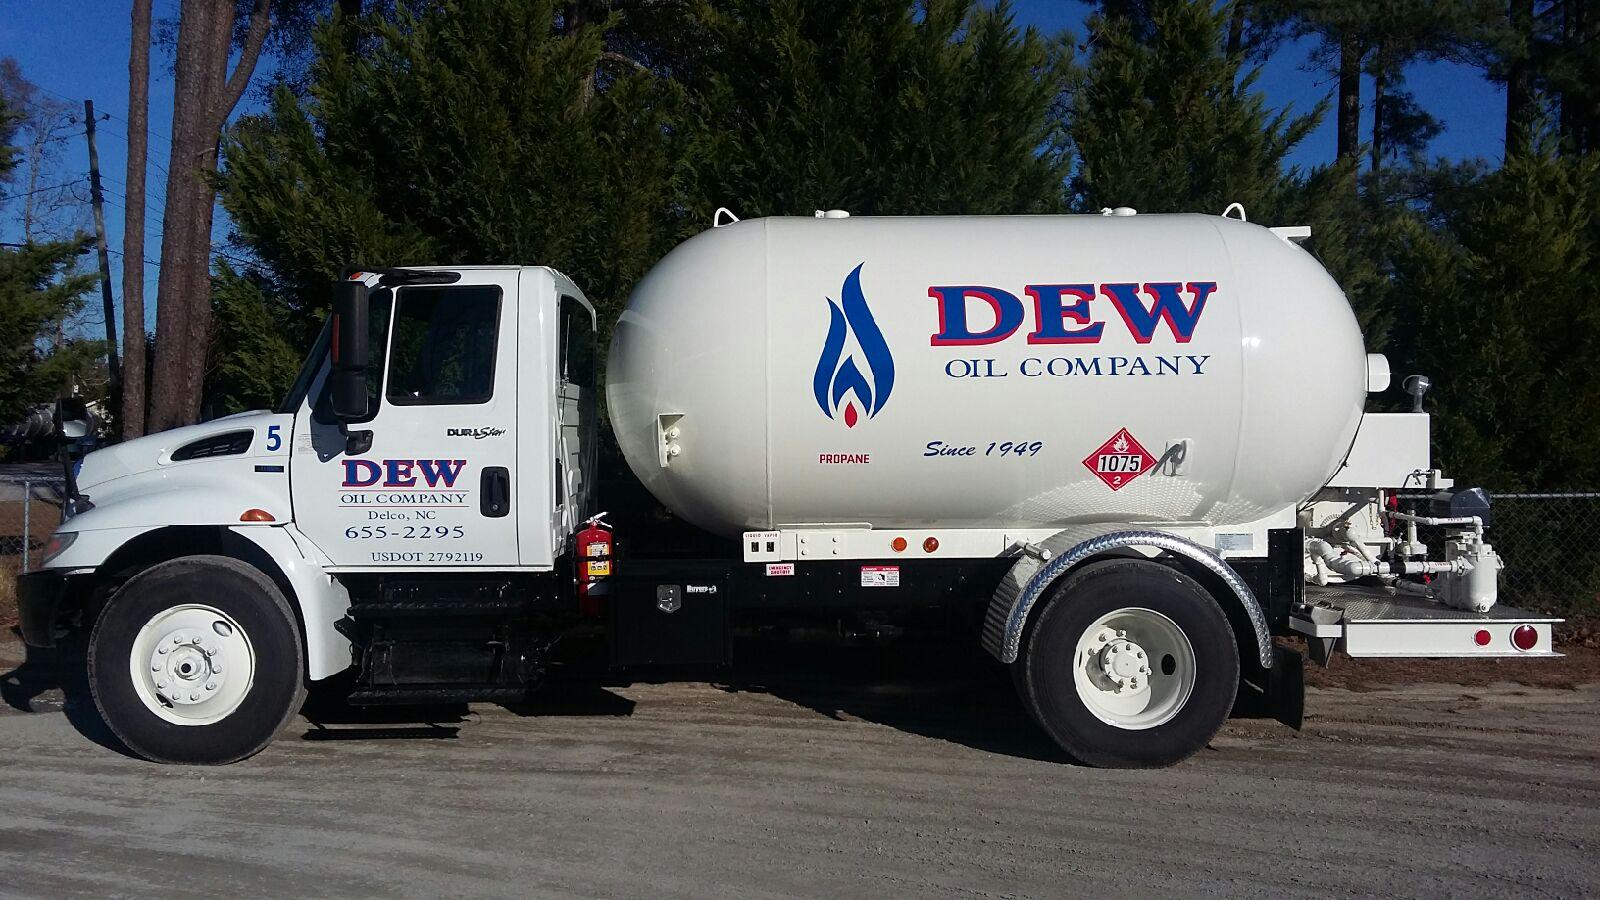 Dew Oil Company Providing Residential and Commercial Propane Services to Columbus, Brunswick, and Bladen Counties.